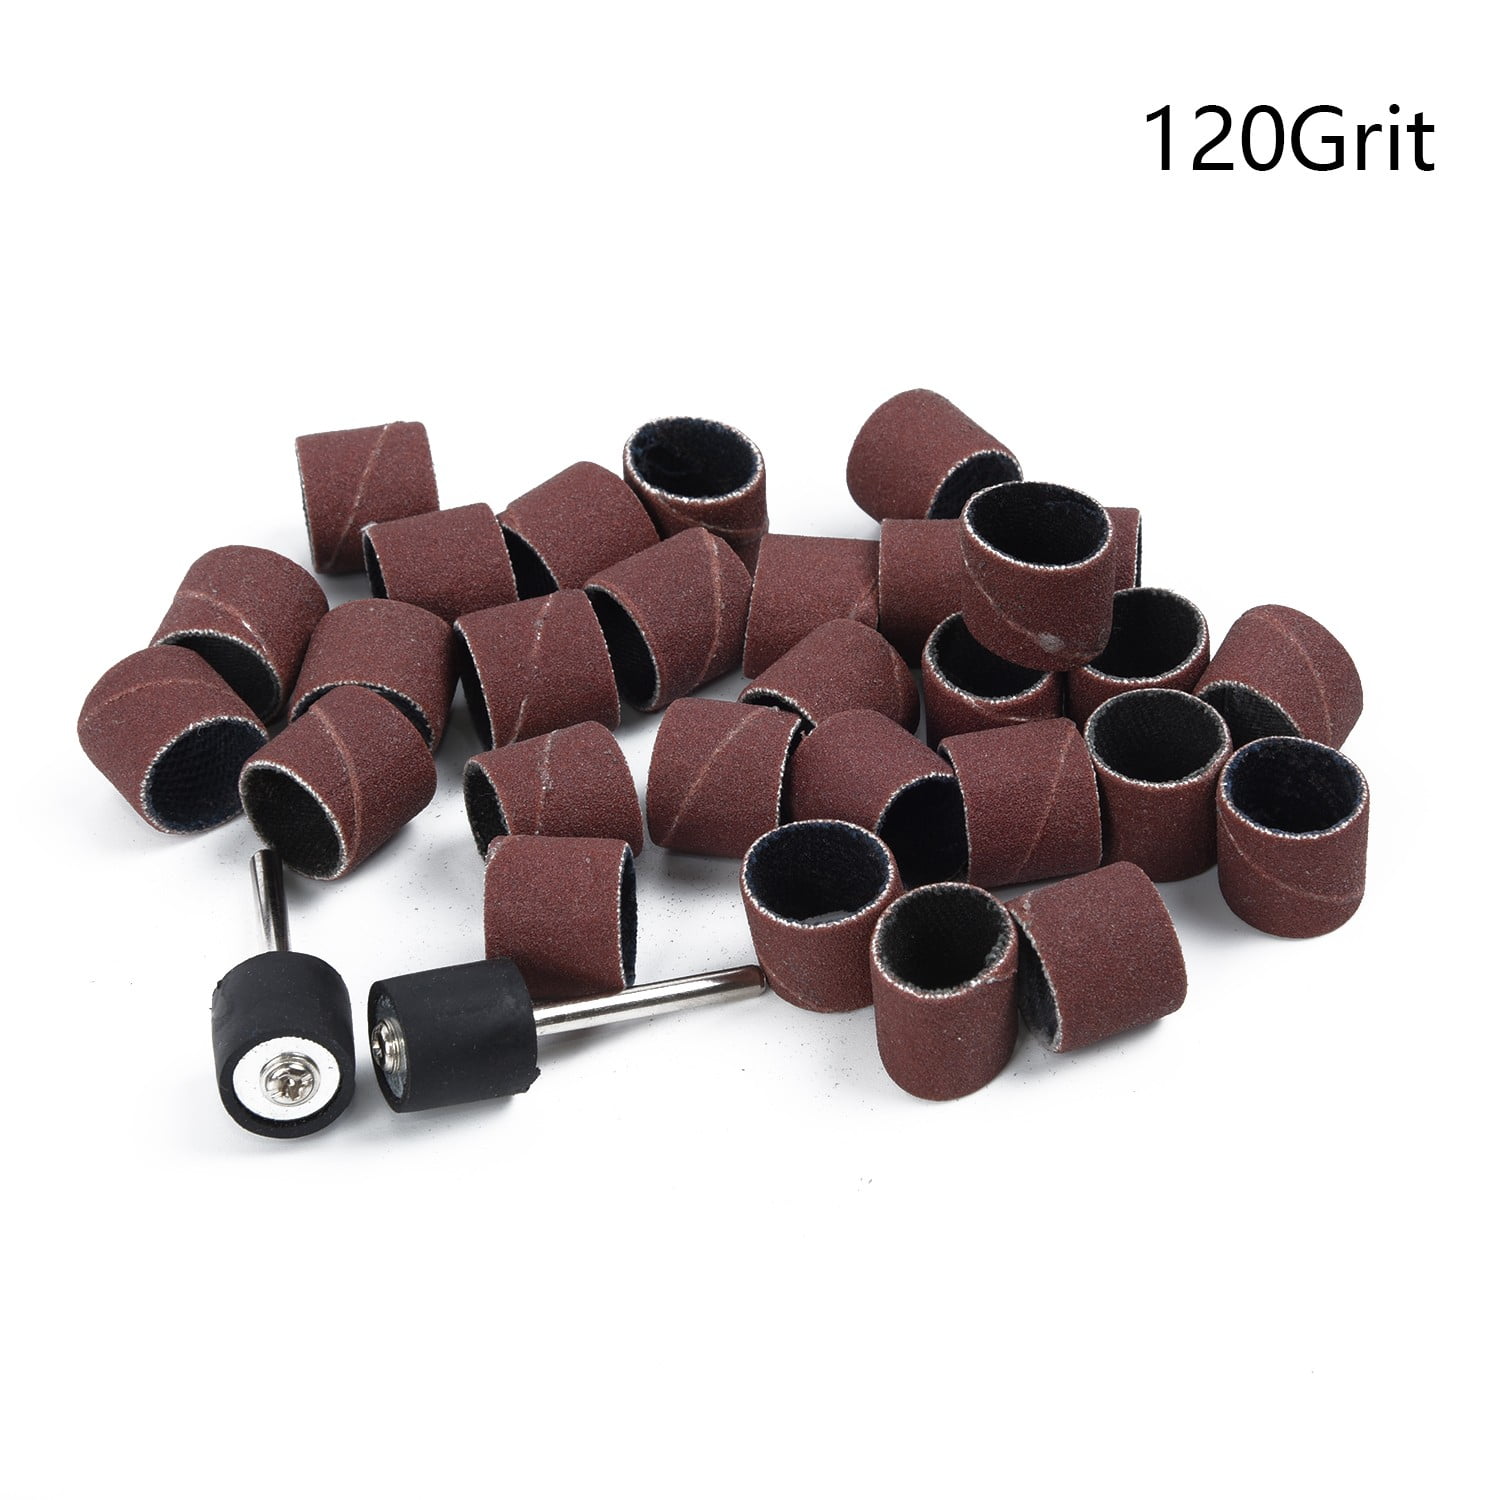 100Pcs 1/2 80 Grit Sanding Drum Bands Sleeves W/ 2 Mandrels For Rotary-Tool 